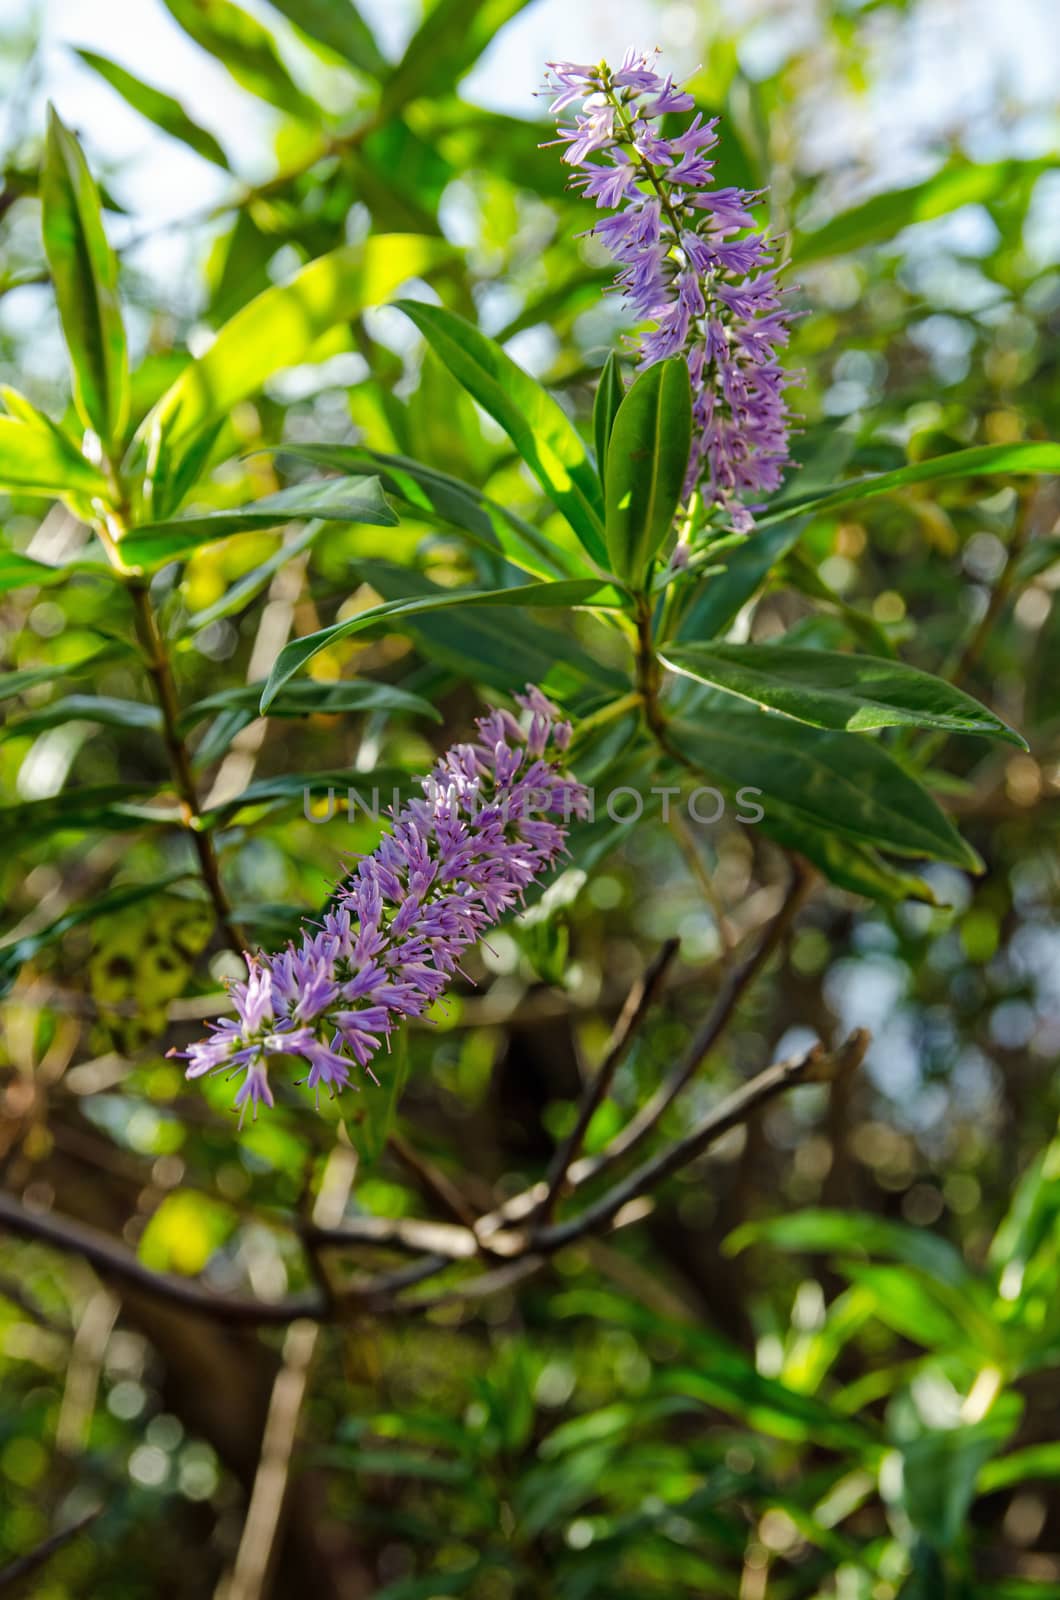 Hebe shrub in bloom by BasPhoto